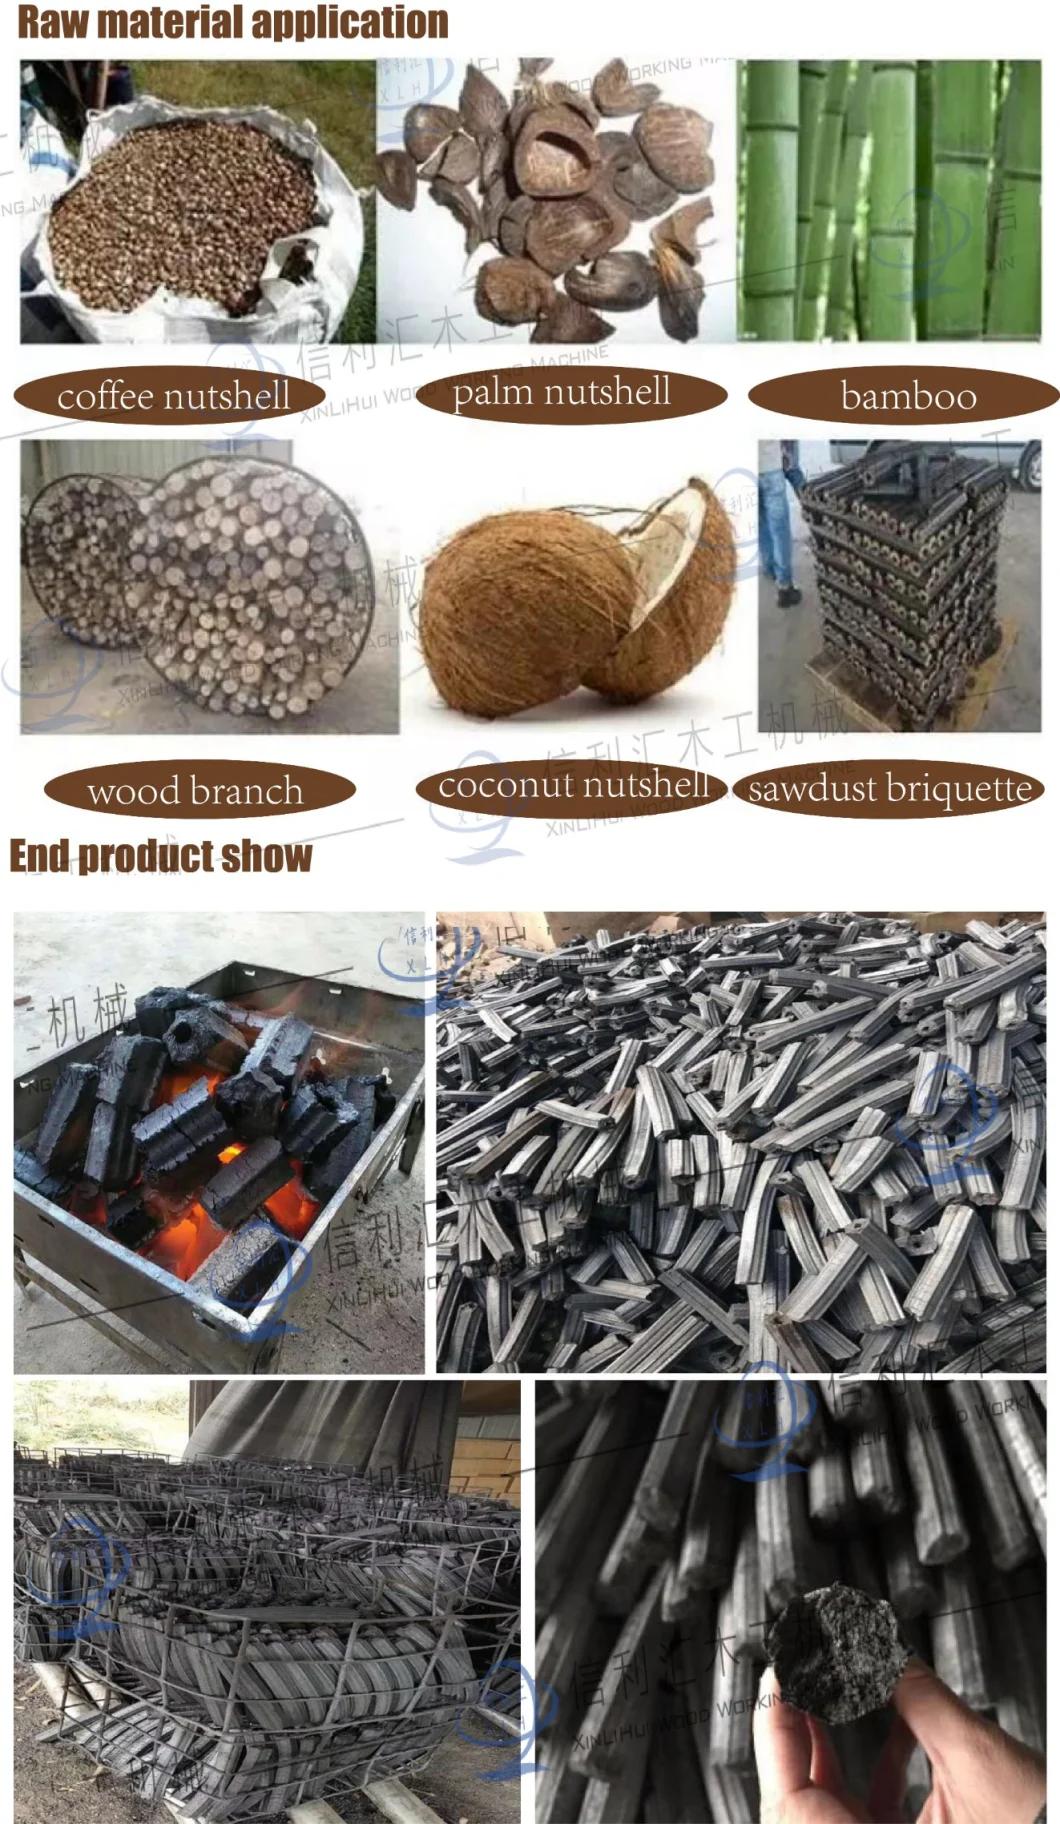 Full Set of Automatic Charcoal Machine Carbon Machine Equipment Environmental Charcoal Machine Production Line 50 Type Rod Machine Charcoal Machine